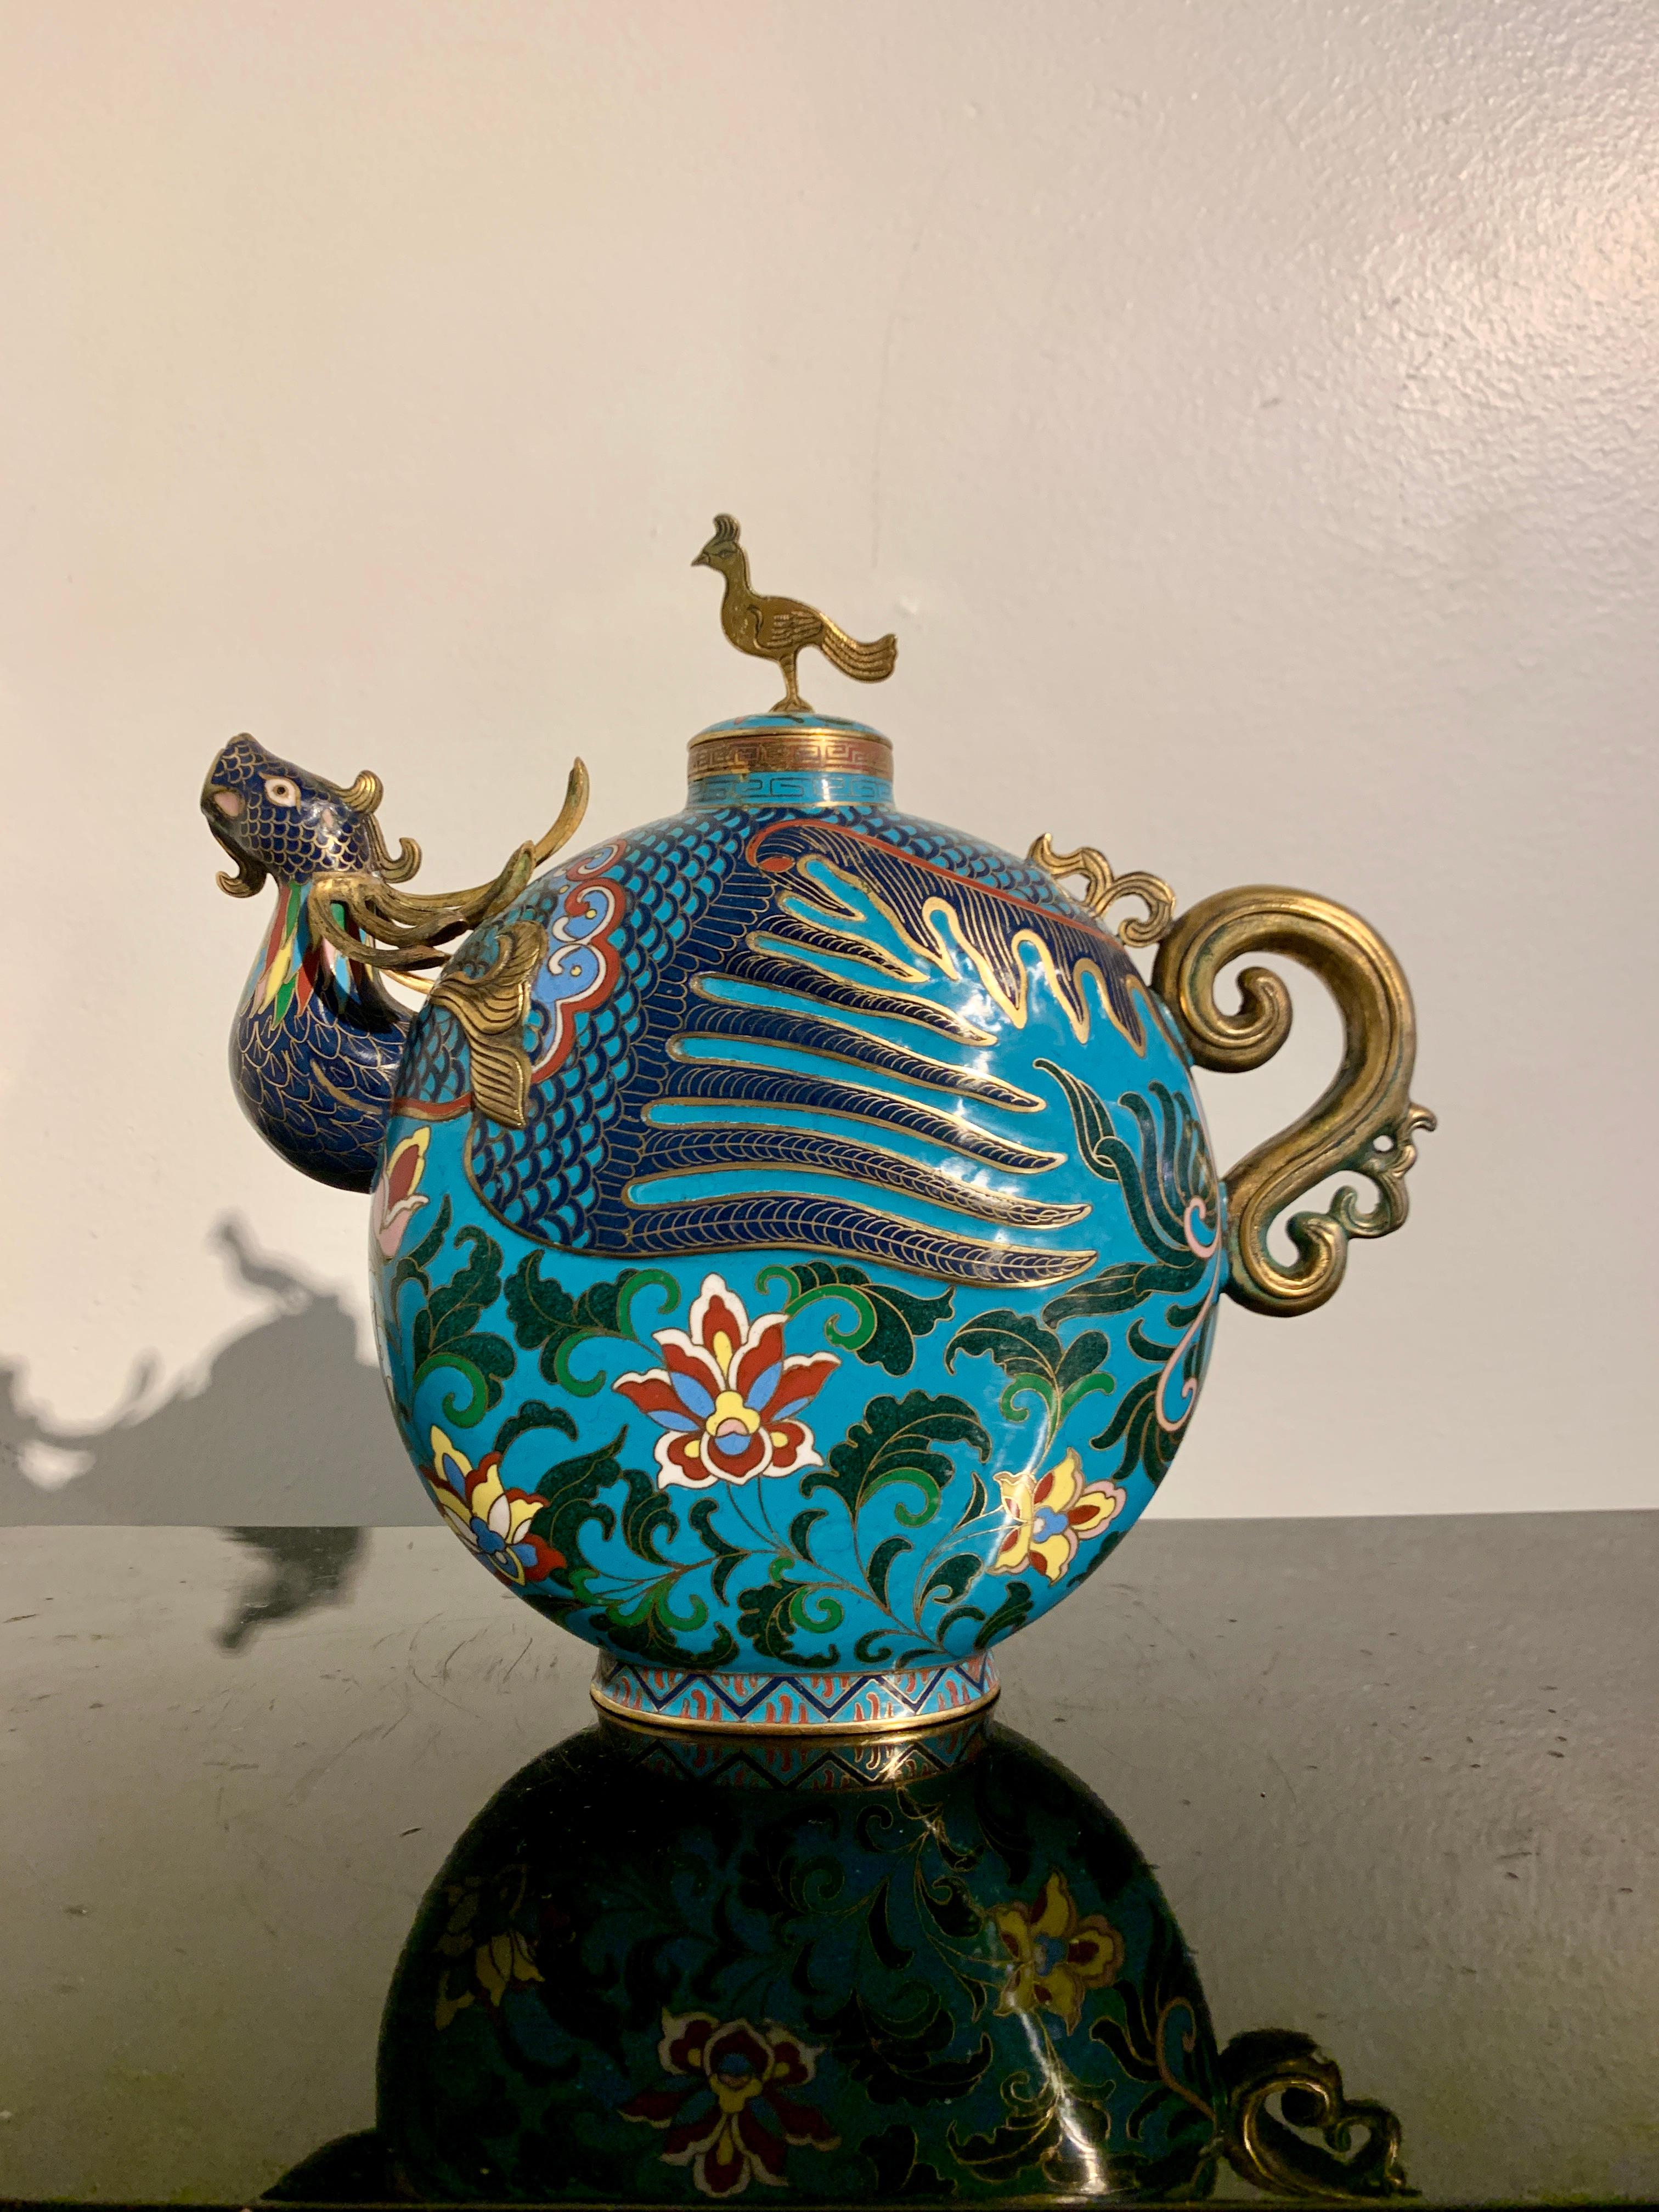 A delightful and unusual Chinese cloisonne enamel copper wine or tea pot in the form of a phoenix, late Republic Period, or post Republic, mid 20th century, China.

The wine pot in the form of a tea pot with a phoenix head spout, reminiscent of the